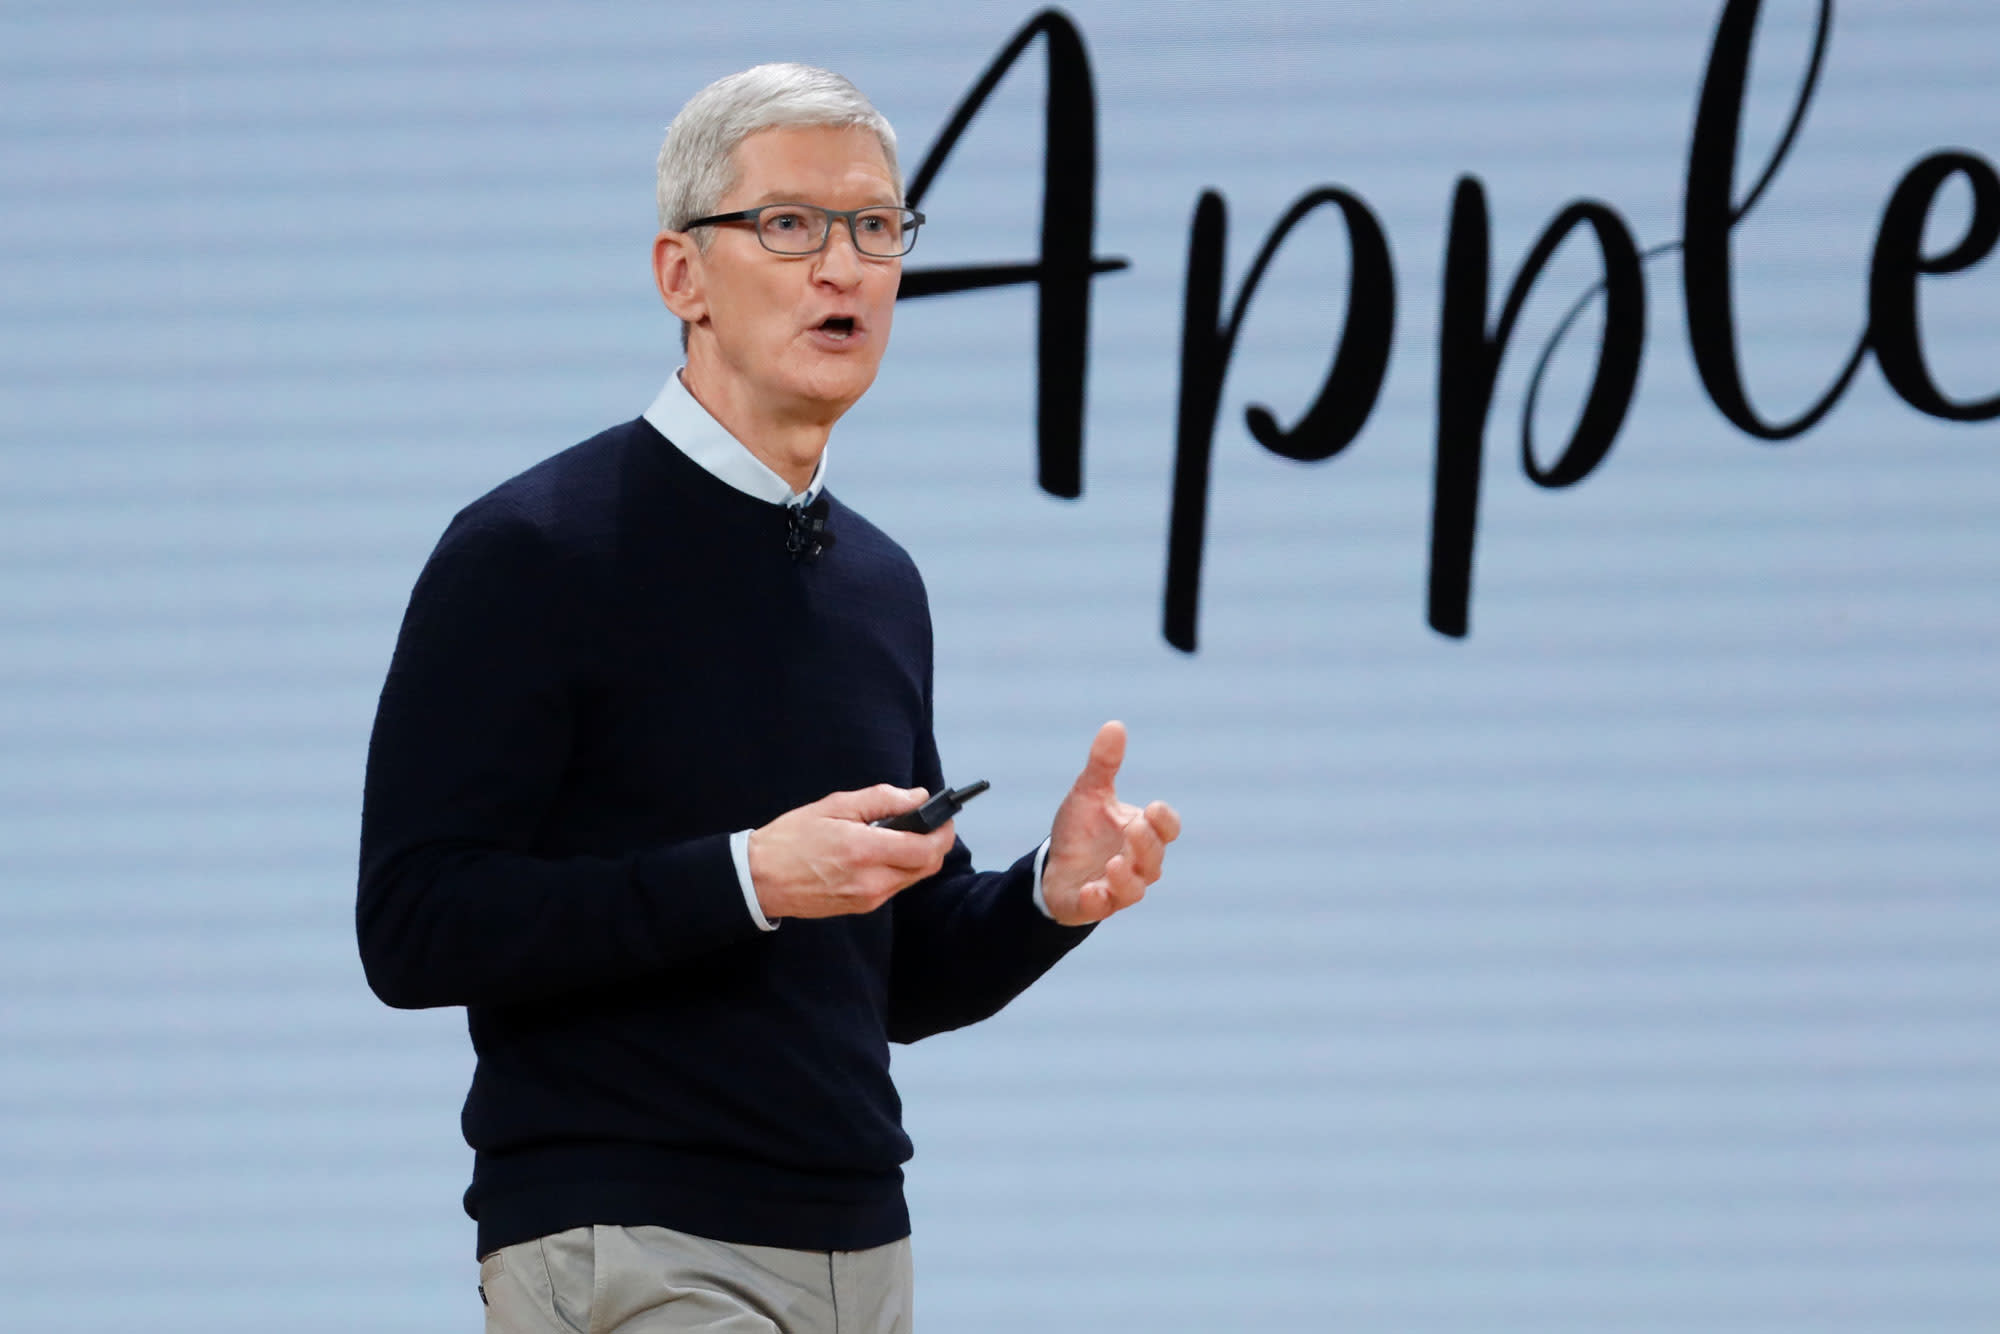 Apple event: New iPad revealed after Tim Cook's speech on education